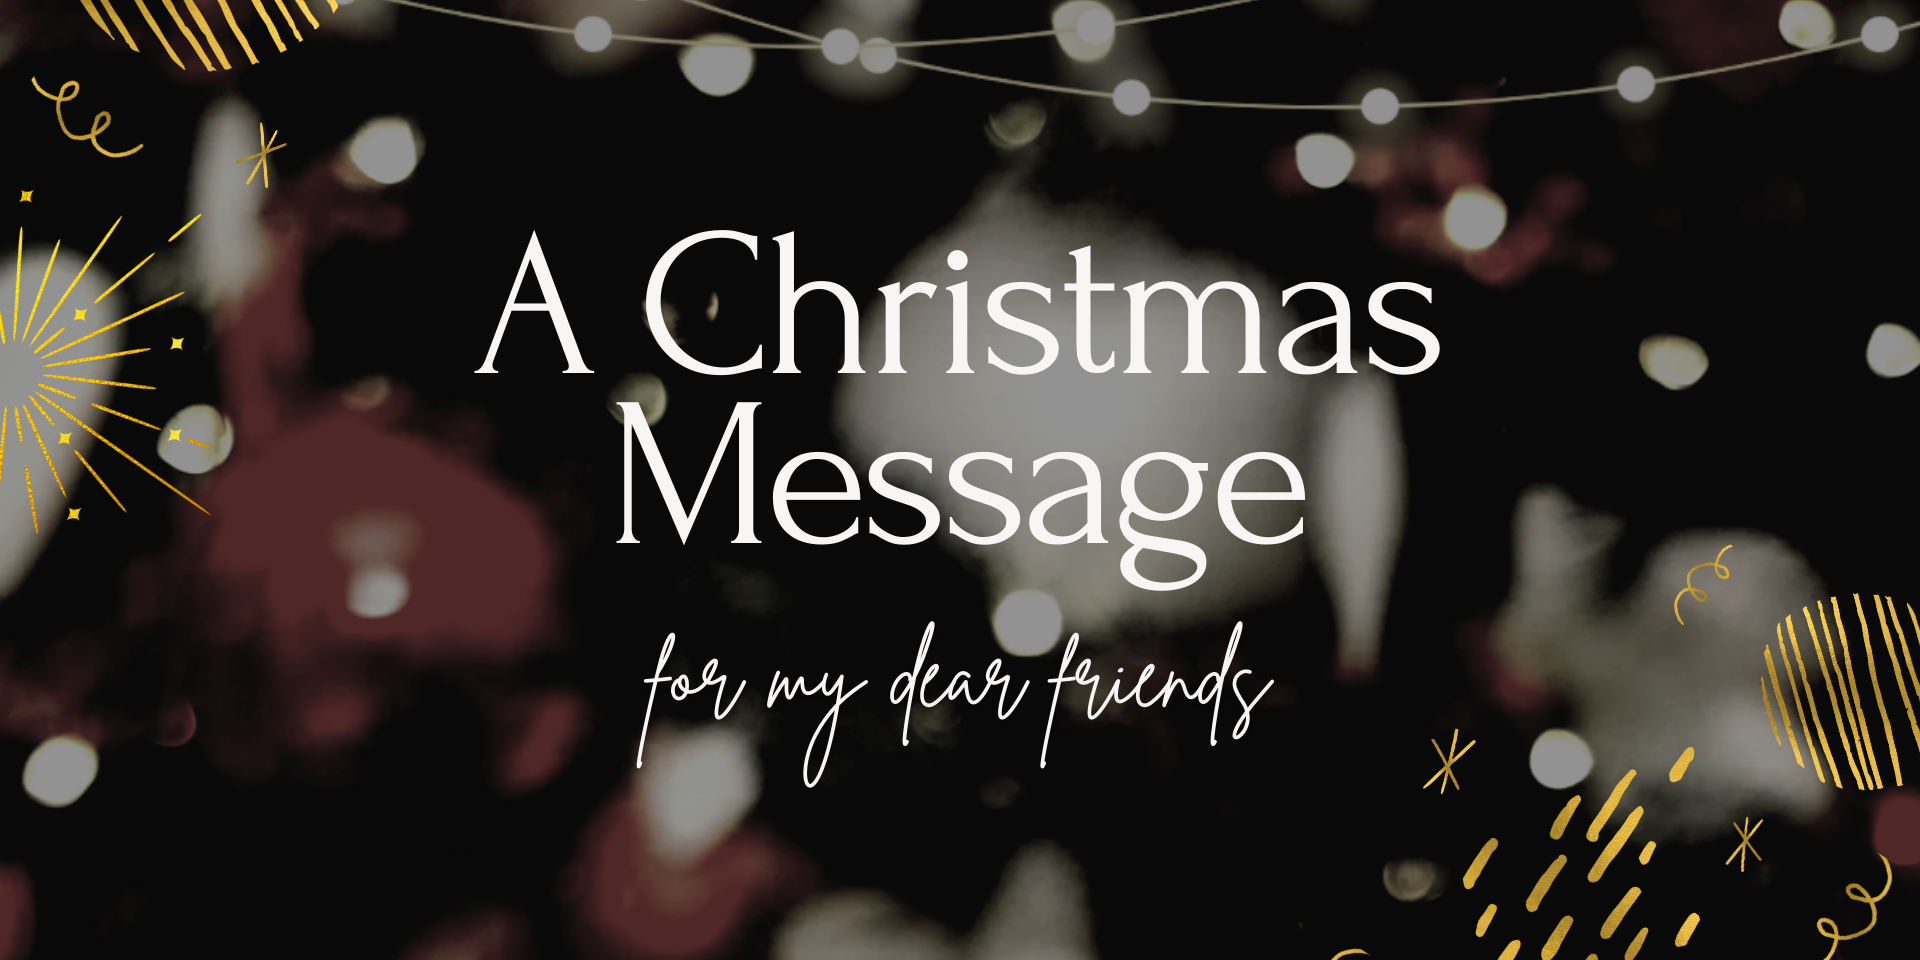 A Christmas Message for my Dear Friends